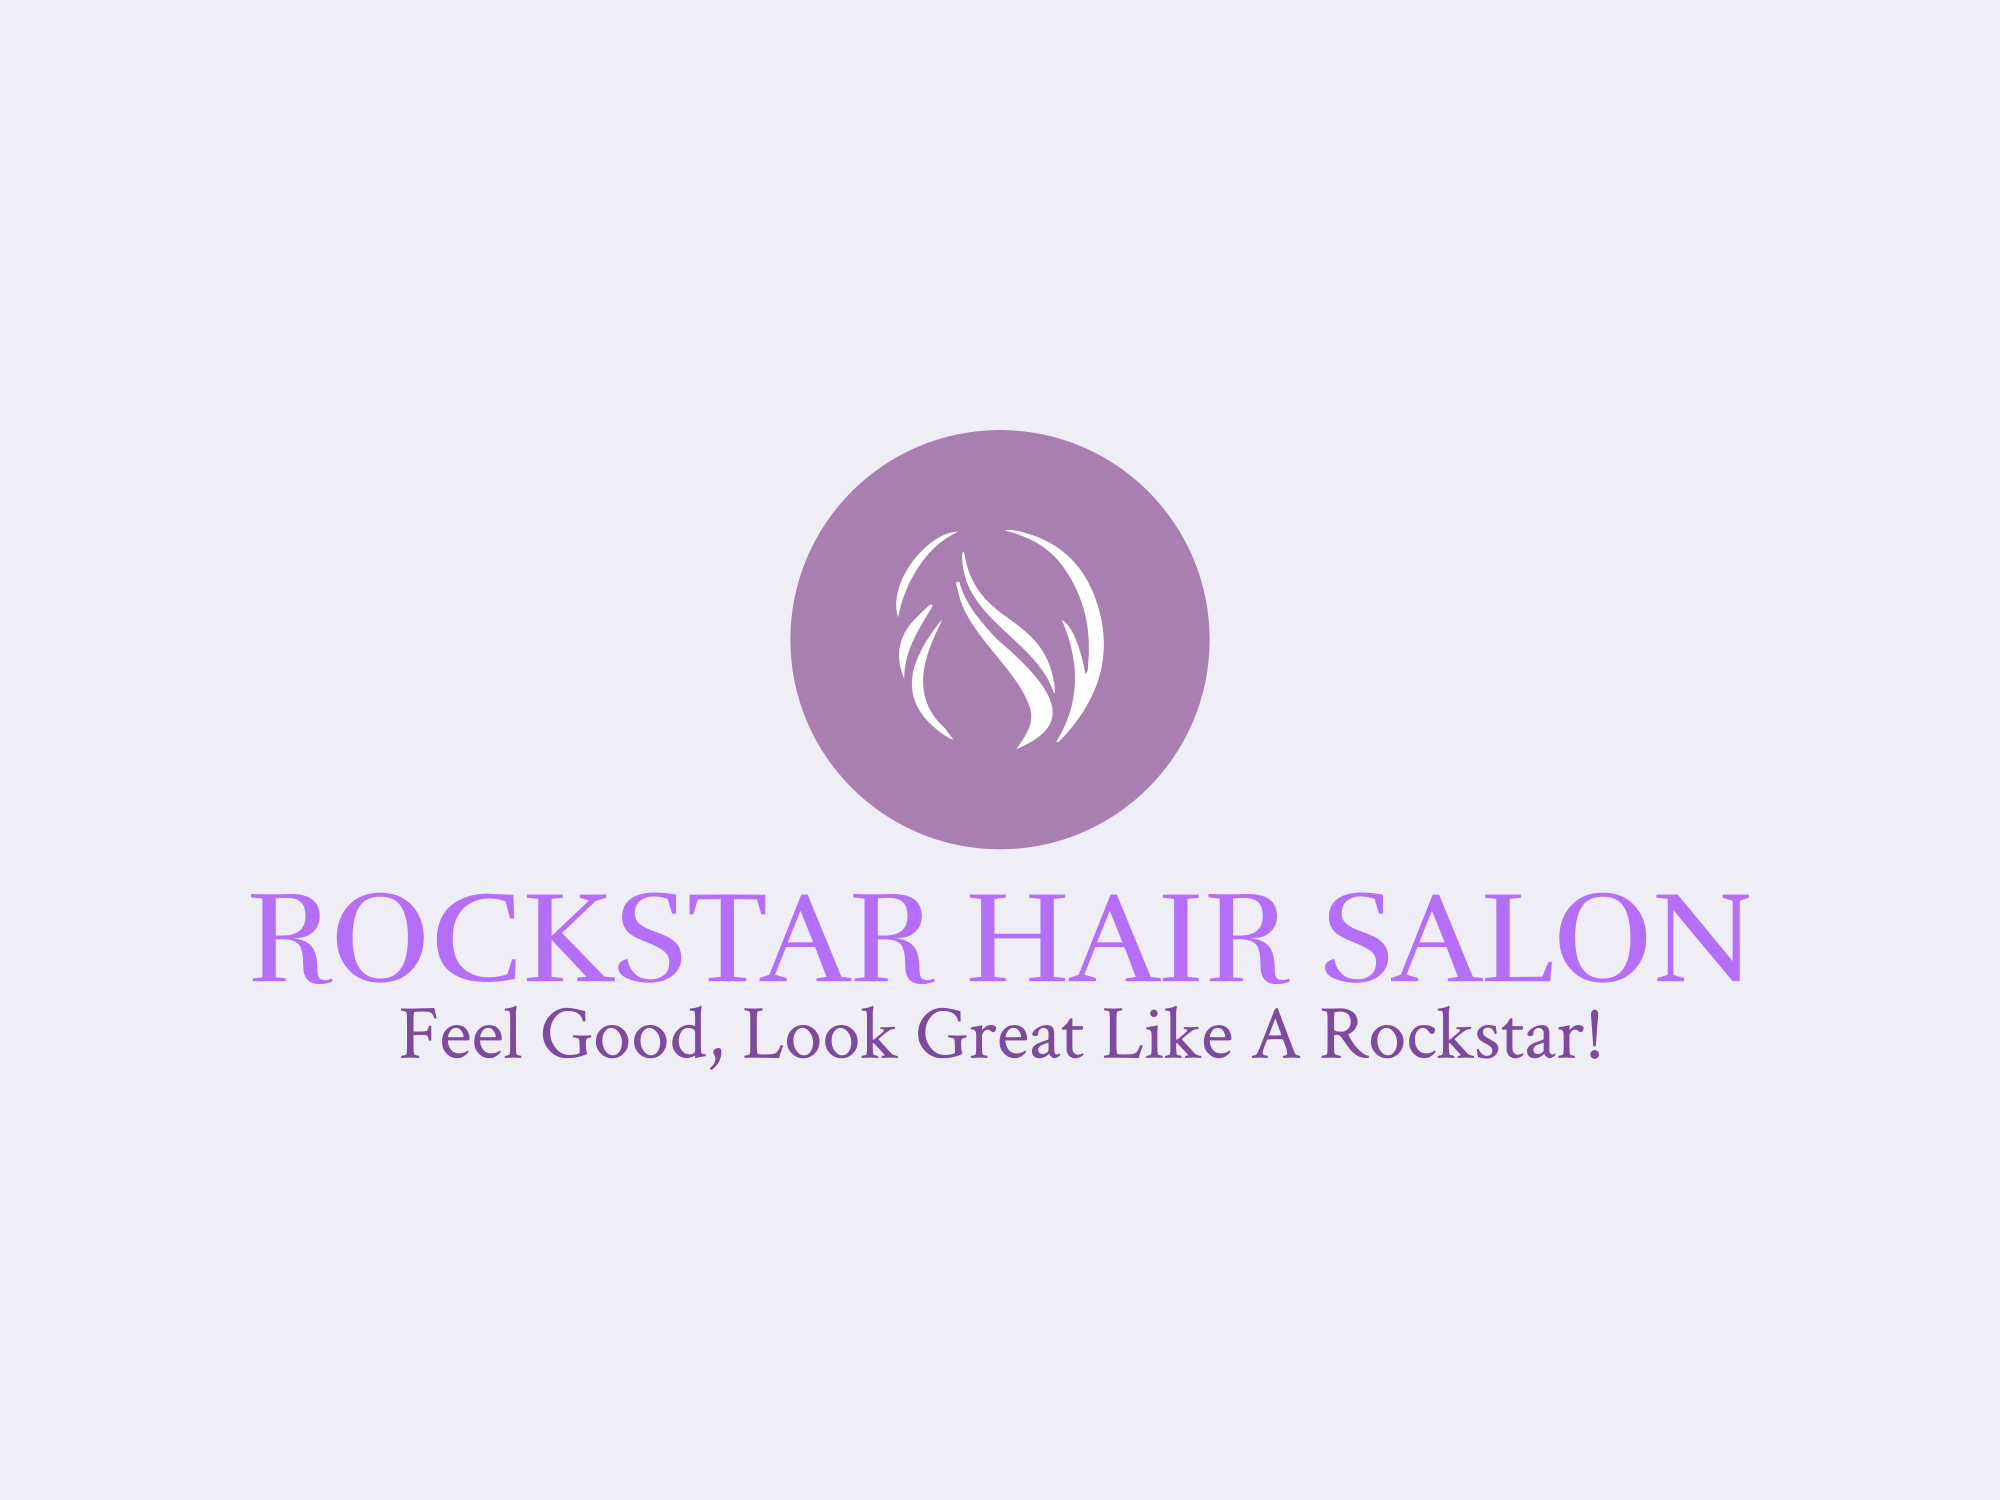 <span style="color: rgb(247, 243, 243); letter-spacing: 11.2px; text-indent: 11.2px; display: inline !important;">rockstar mobile hair salon</span>